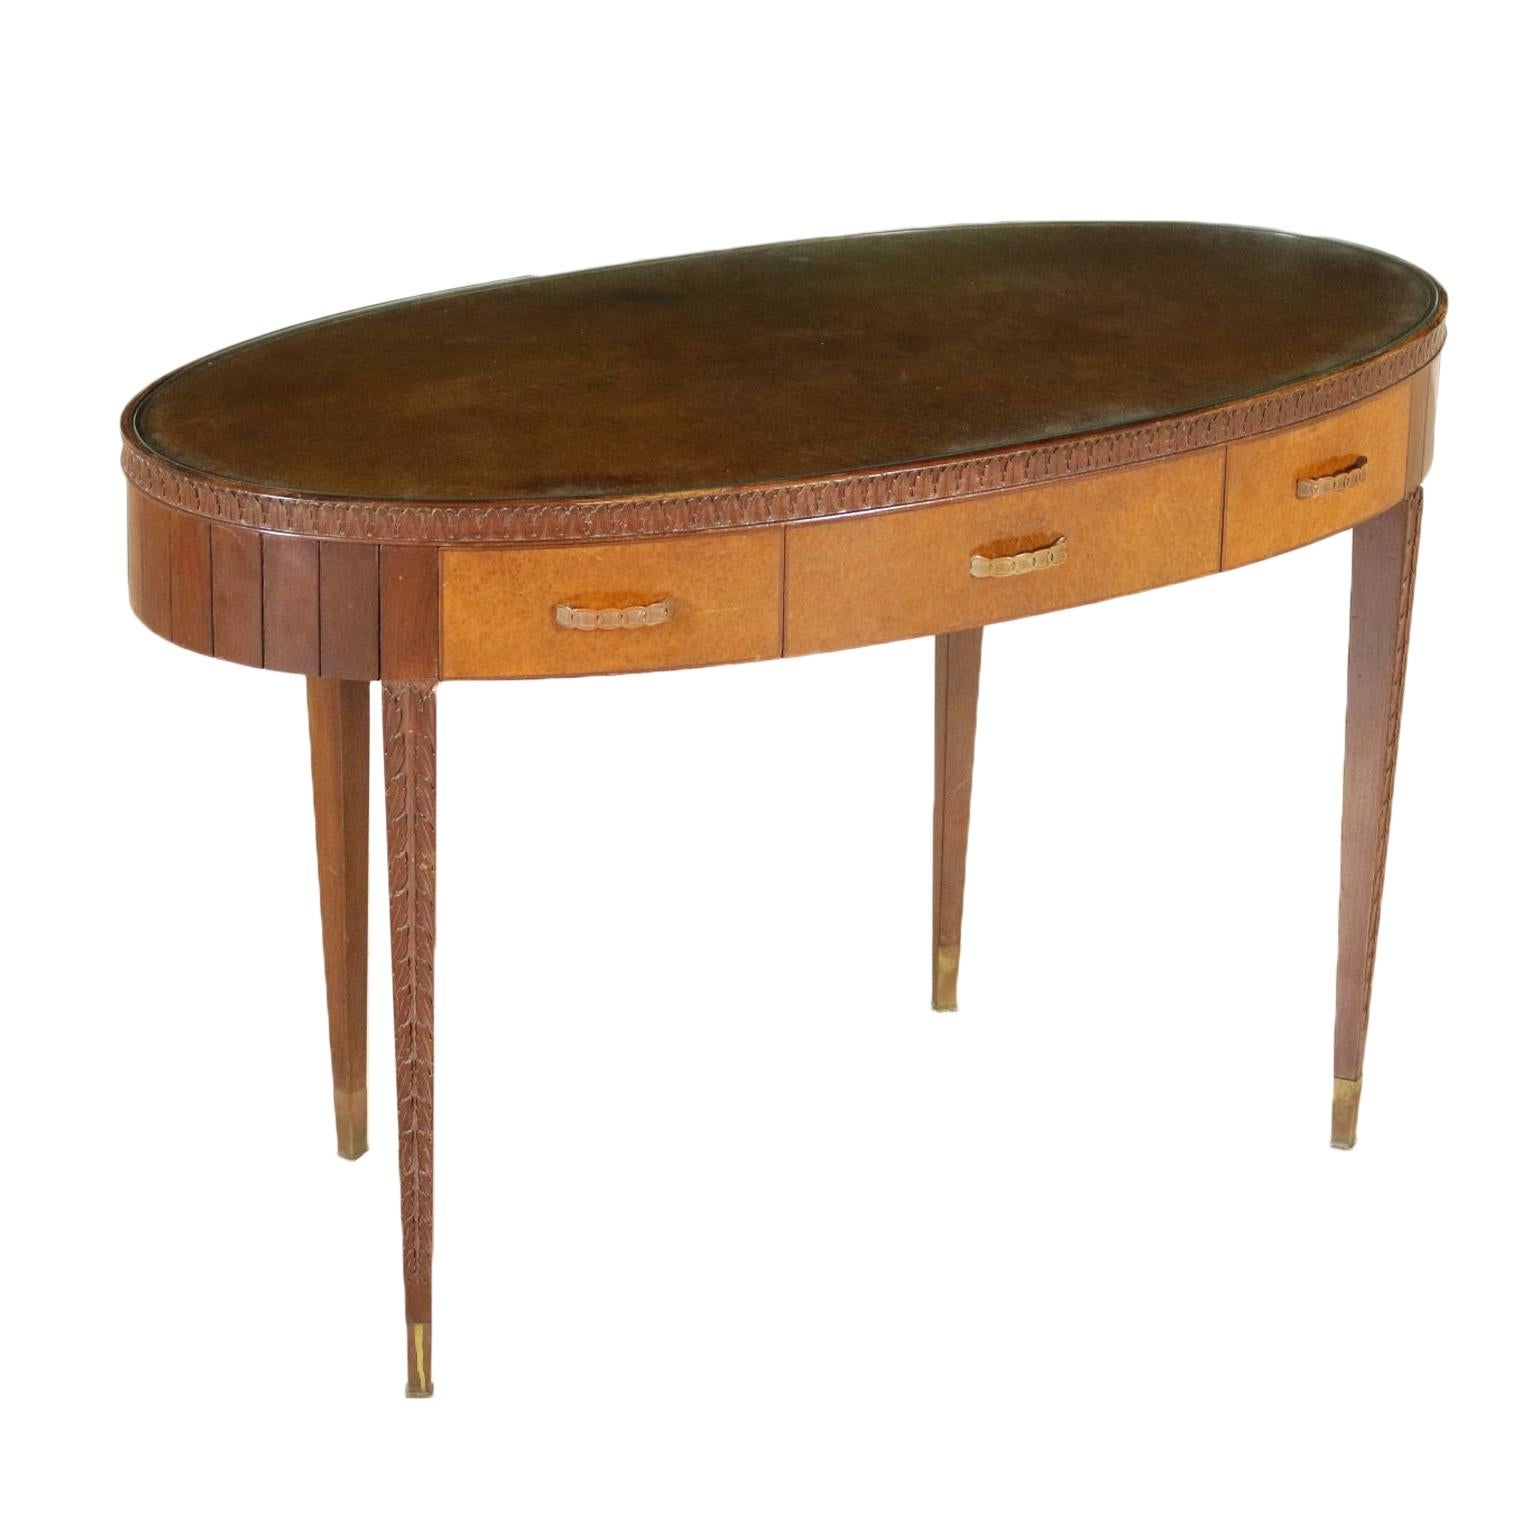 Writing Desk Attributable to Paolo Buffa Vintage Italy, 1950s-1960s